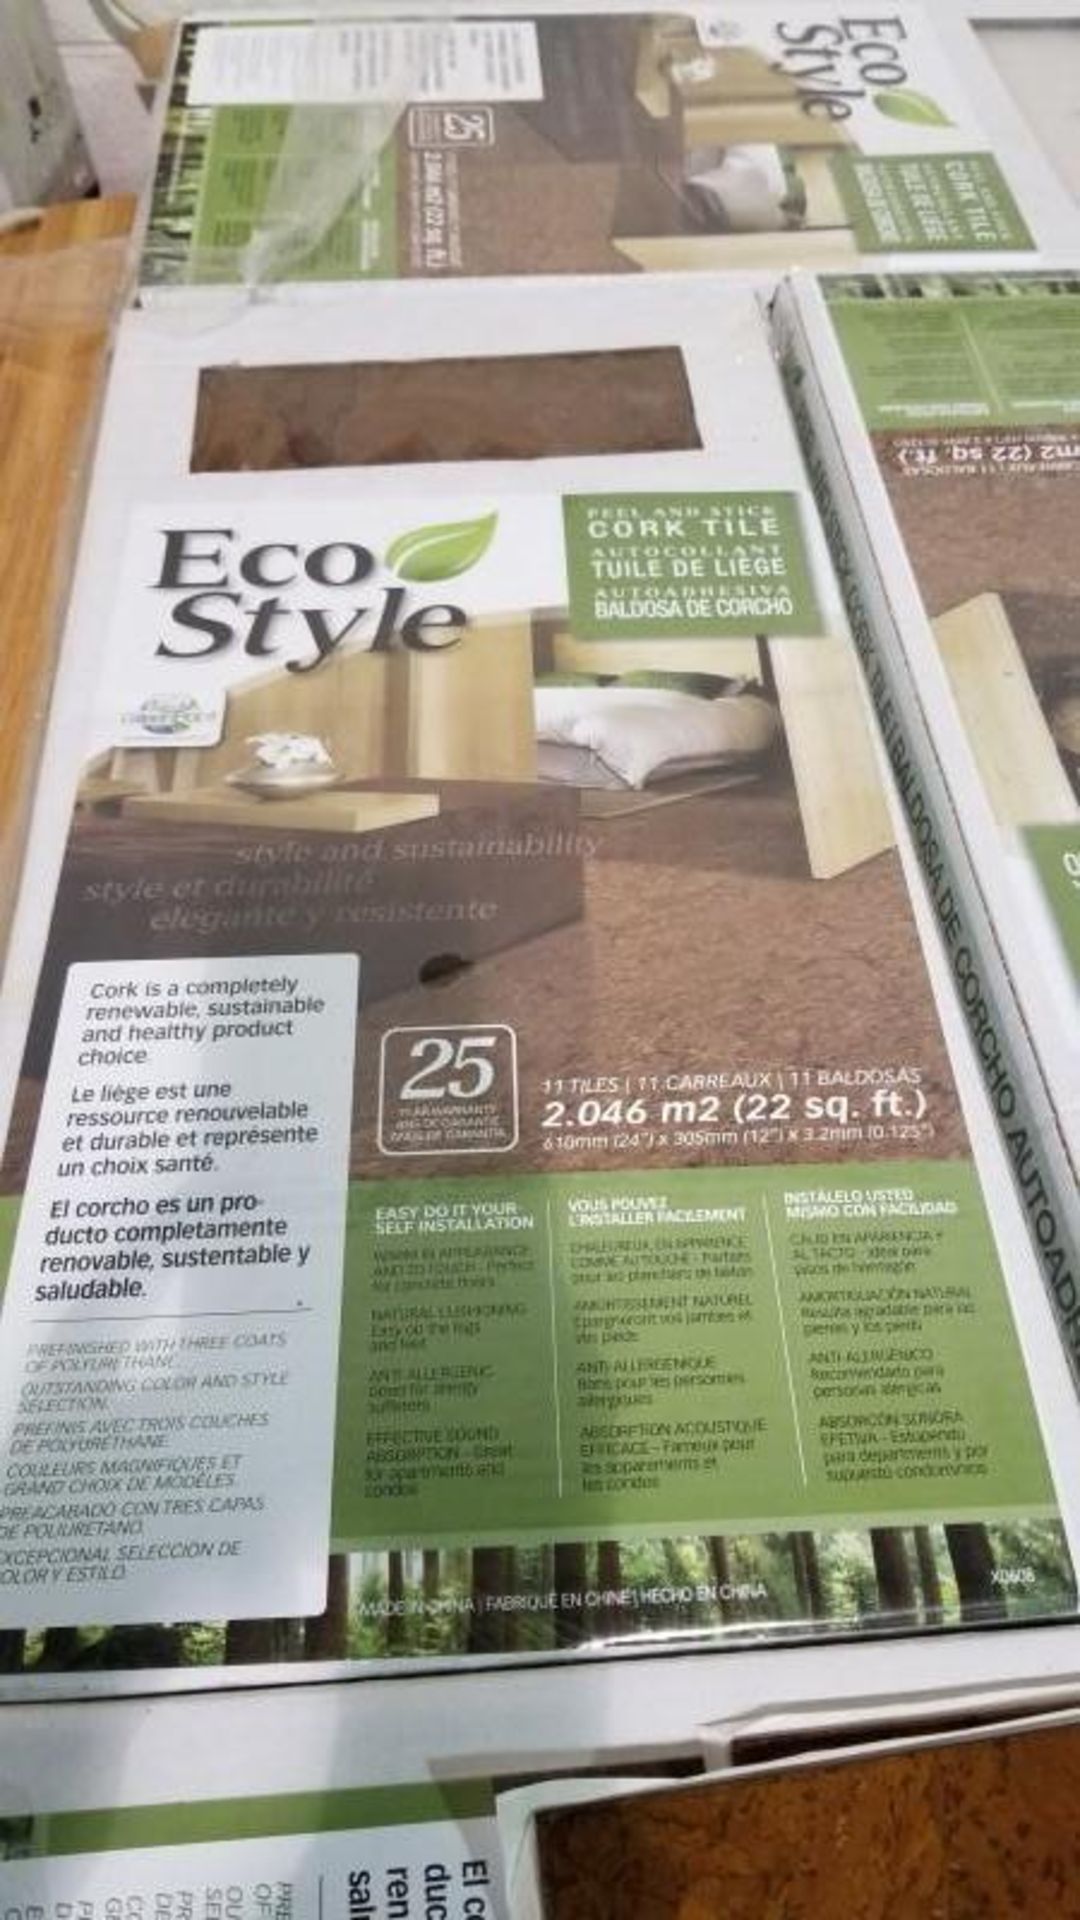 3.2mm Eco Style Peel and Stick Cork Tile - Mirlin Brown - 22 Sq ft per box